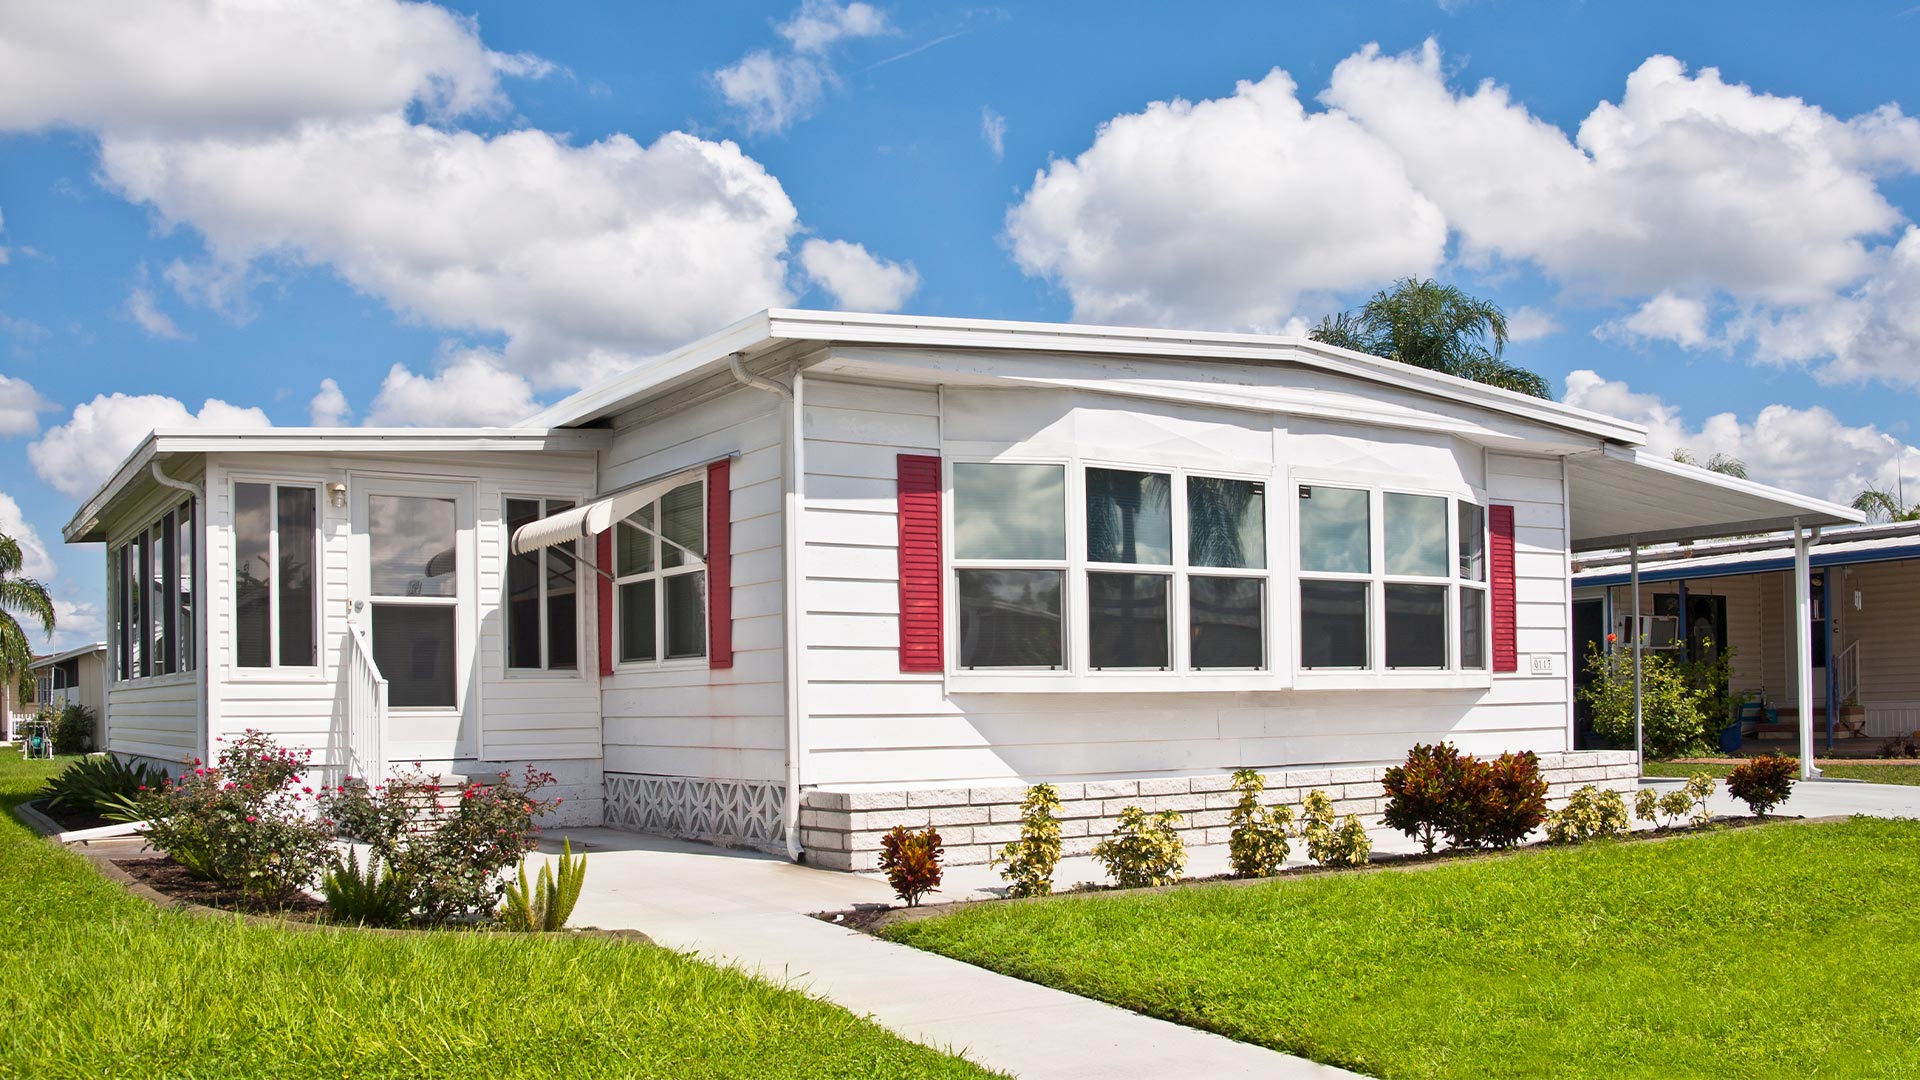 Mobile home refinancing | Loan options and requirements